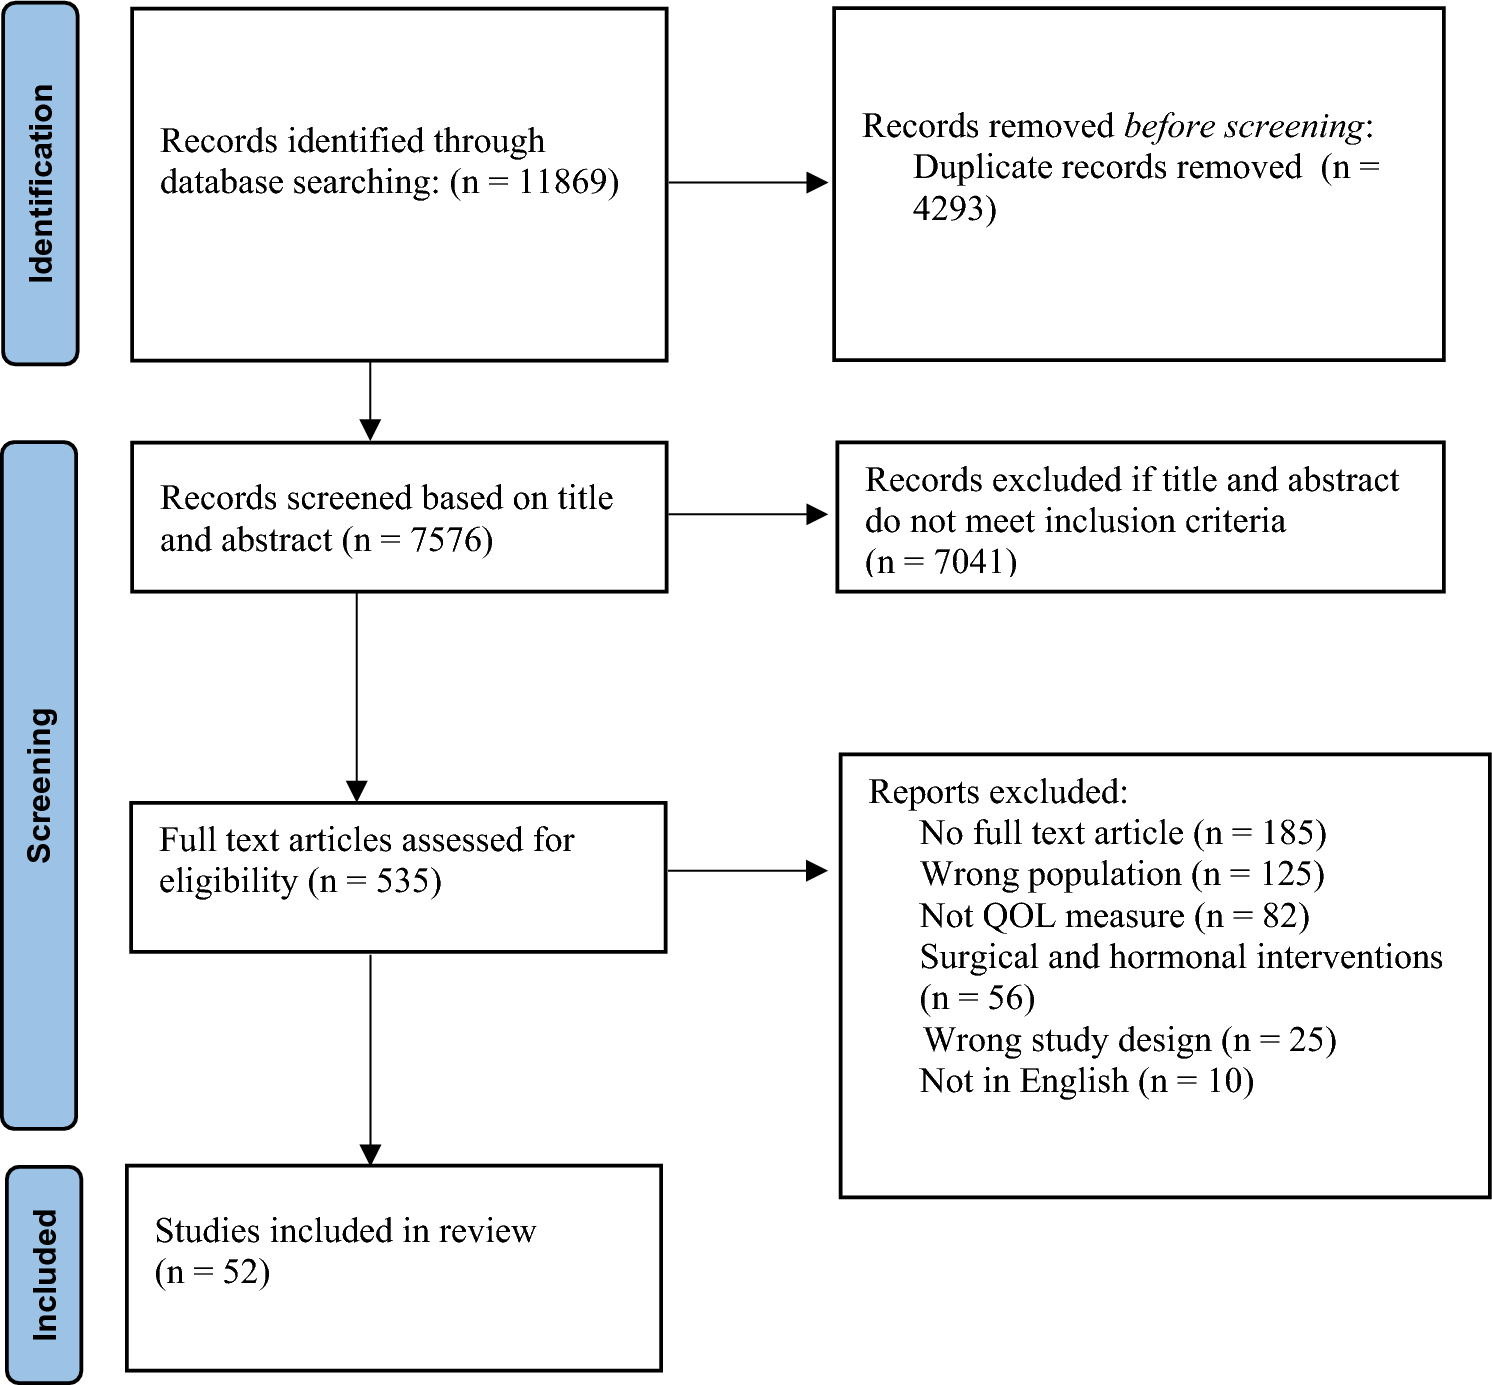 Biopsychosocial factors of quality of life in individuals with moderate to severe traumatic brain injury: a scoping review